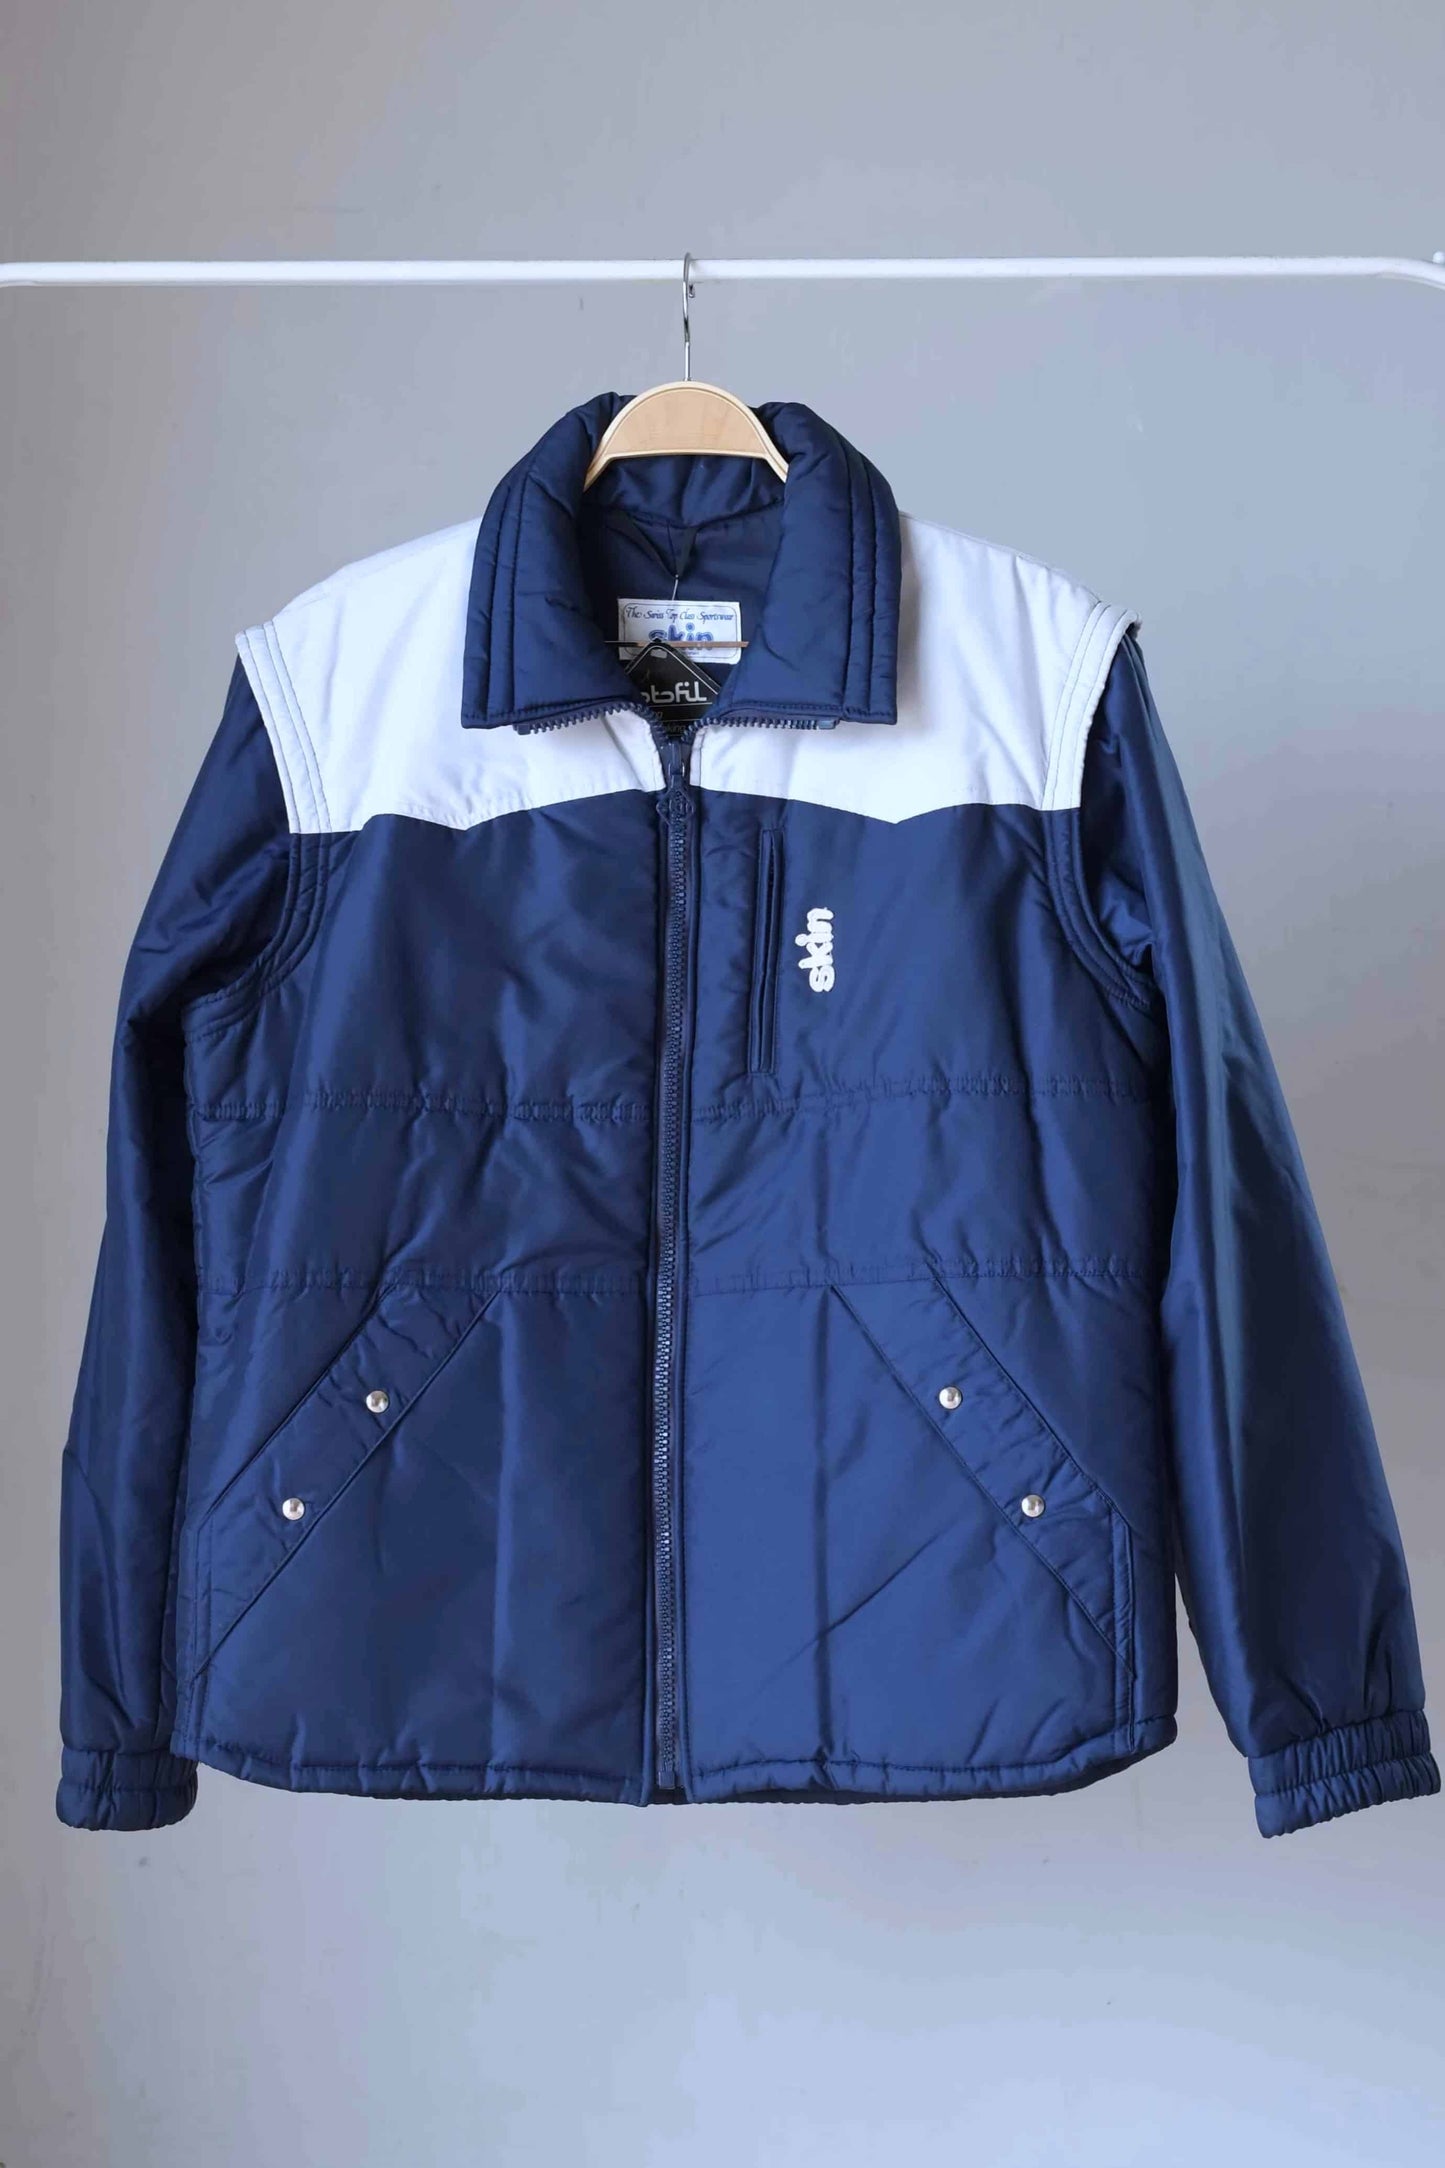 Vintage 80's Men's Ski Jacket with Removable Sleeves navy